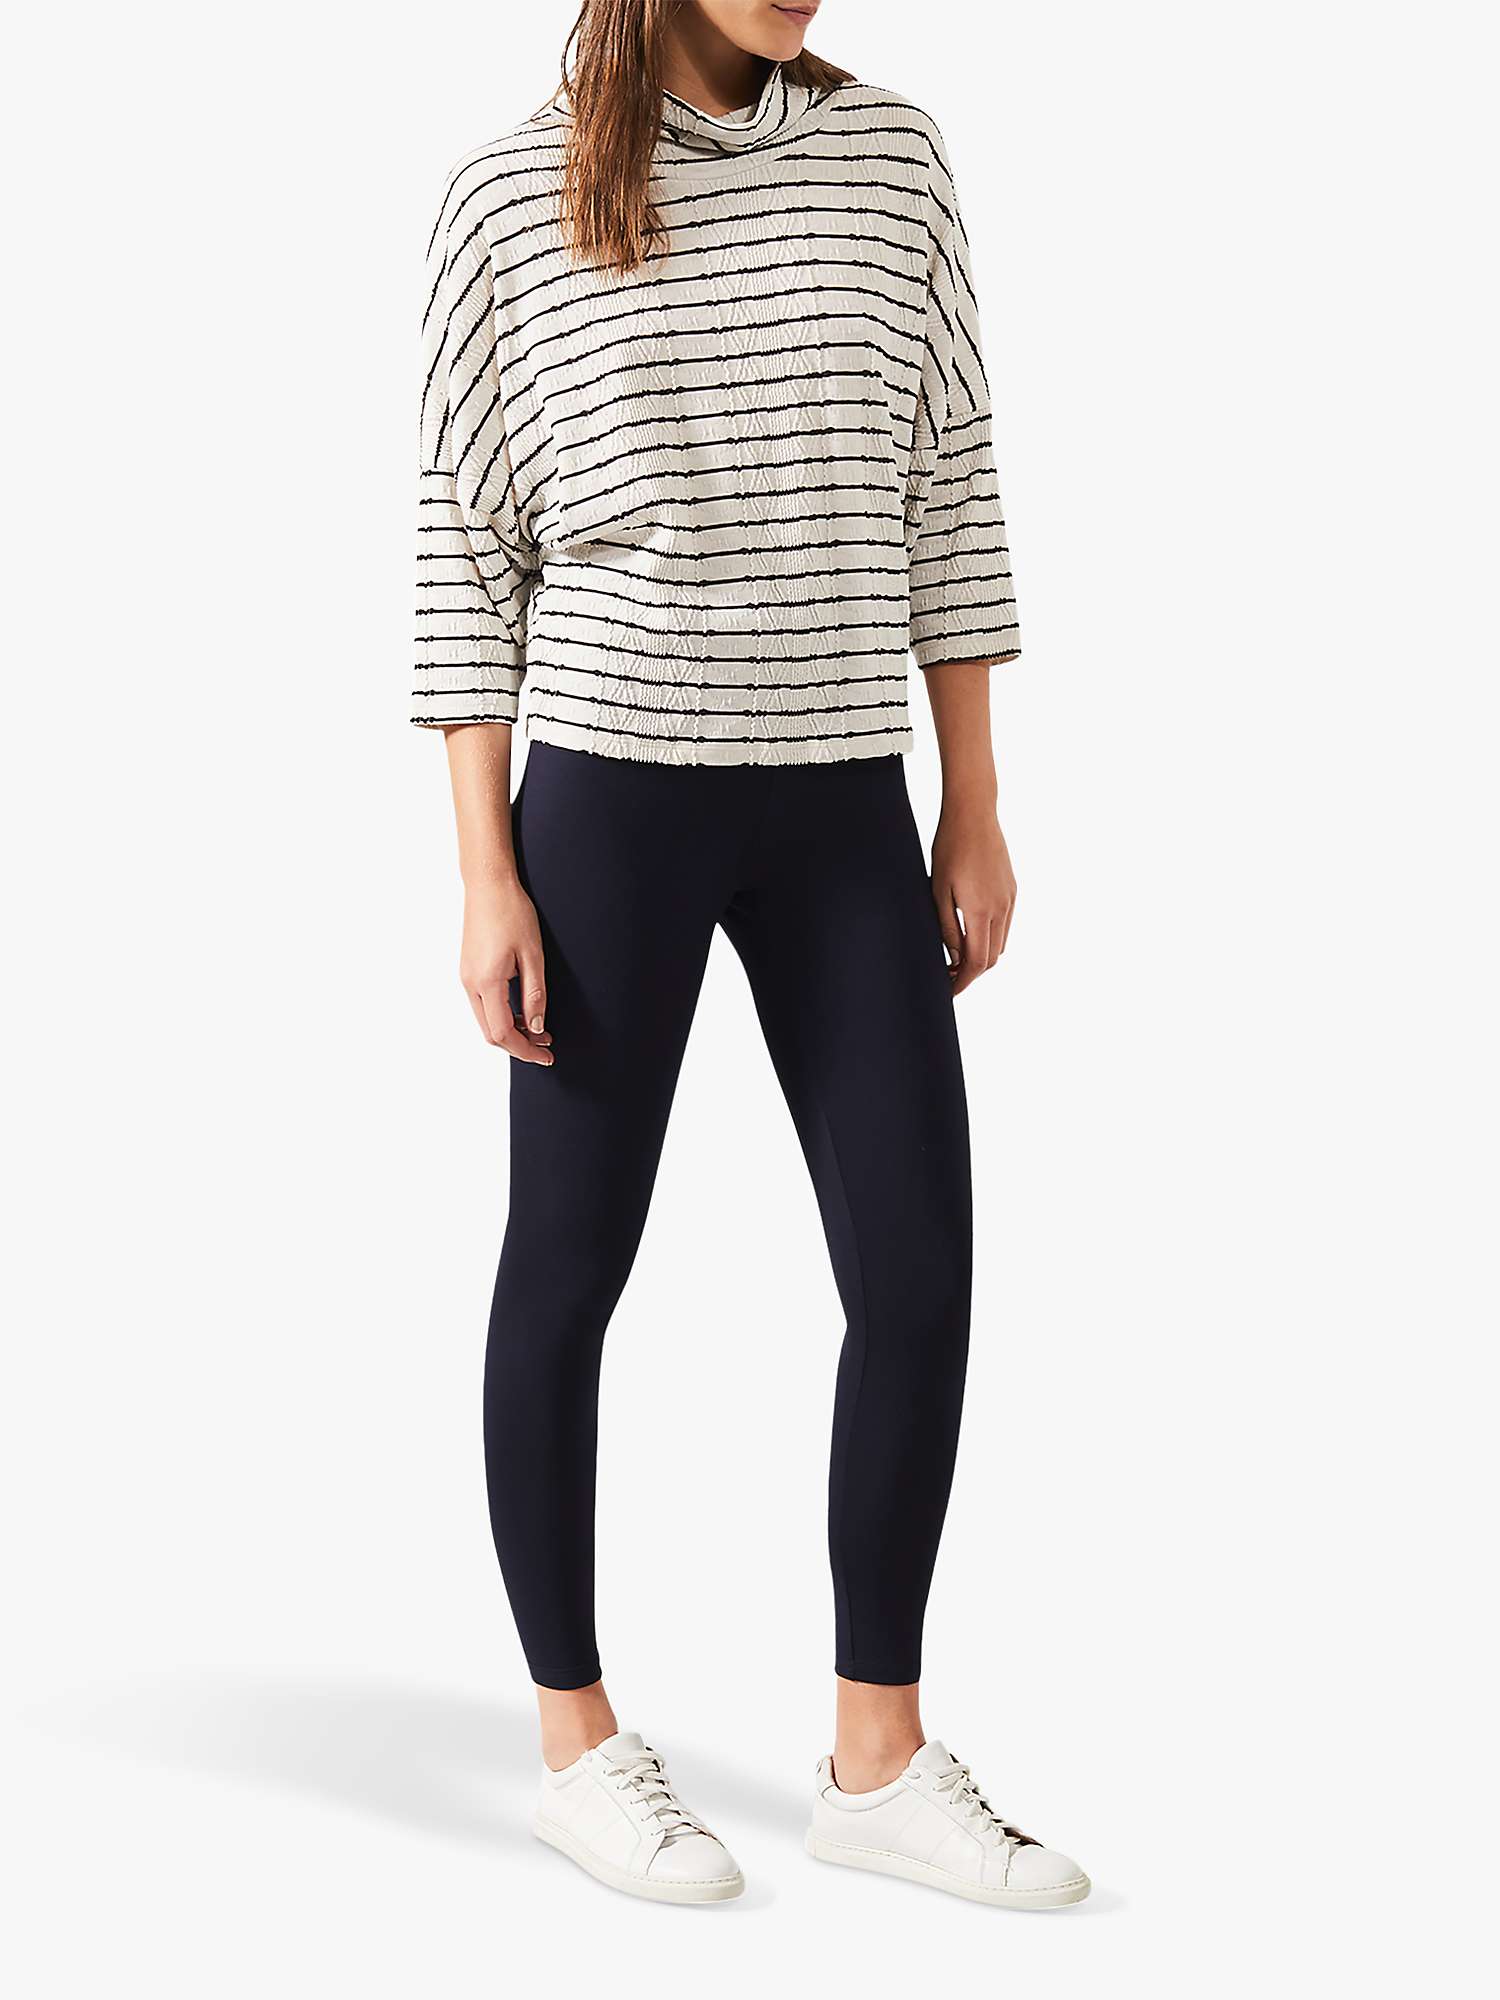 Buy Phase Eight Lizzie Soft Jersey Leggings Online at johnlewis.com